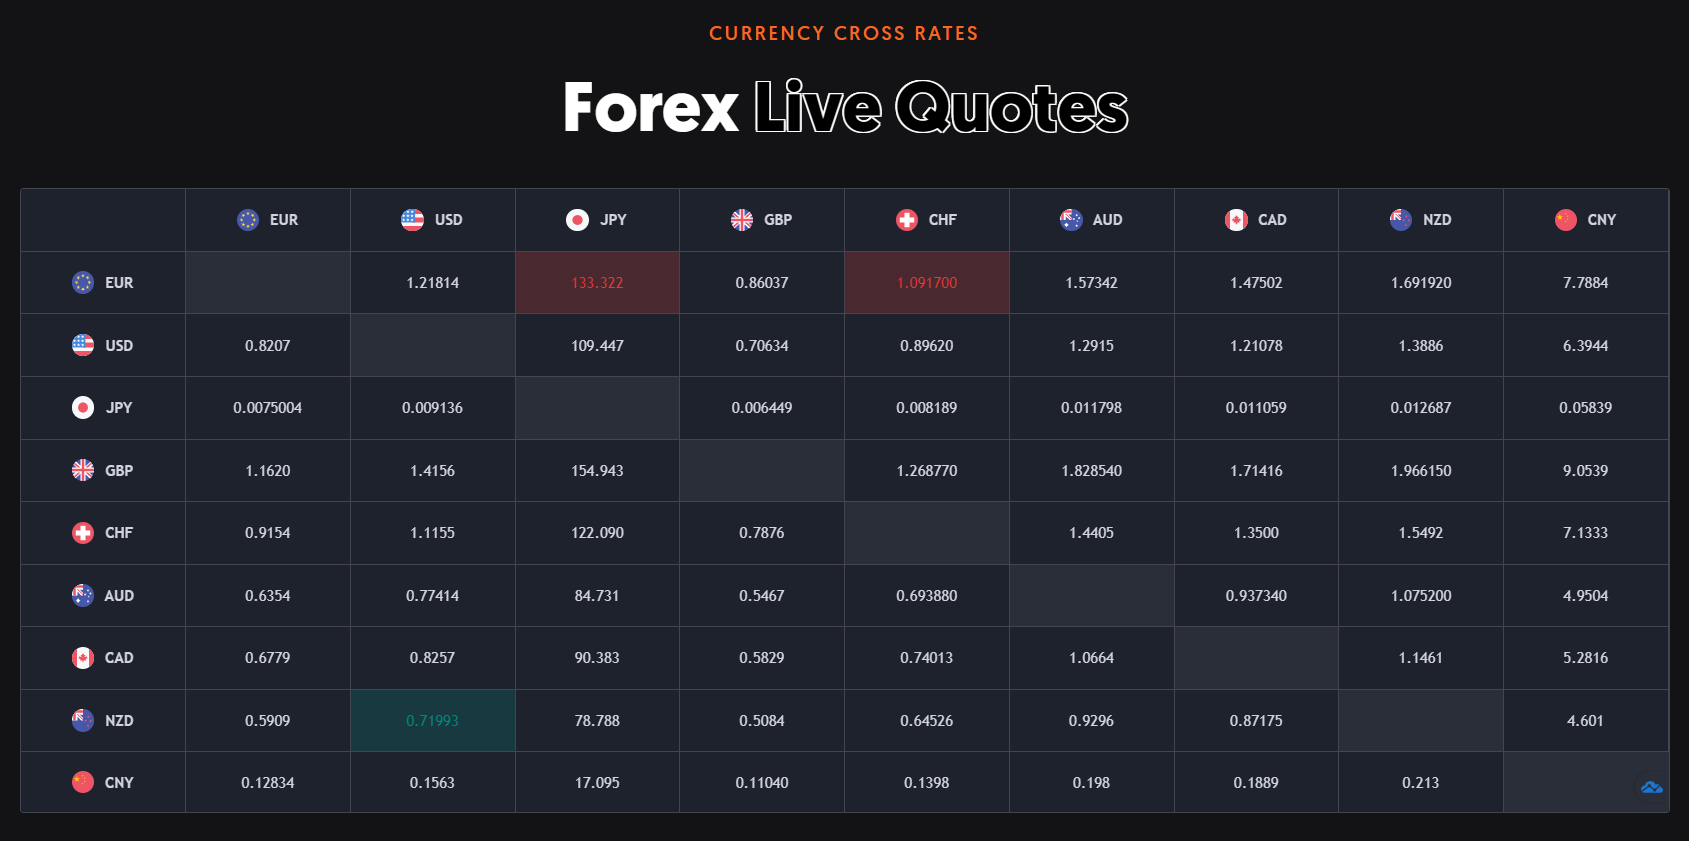 Forex live quotes